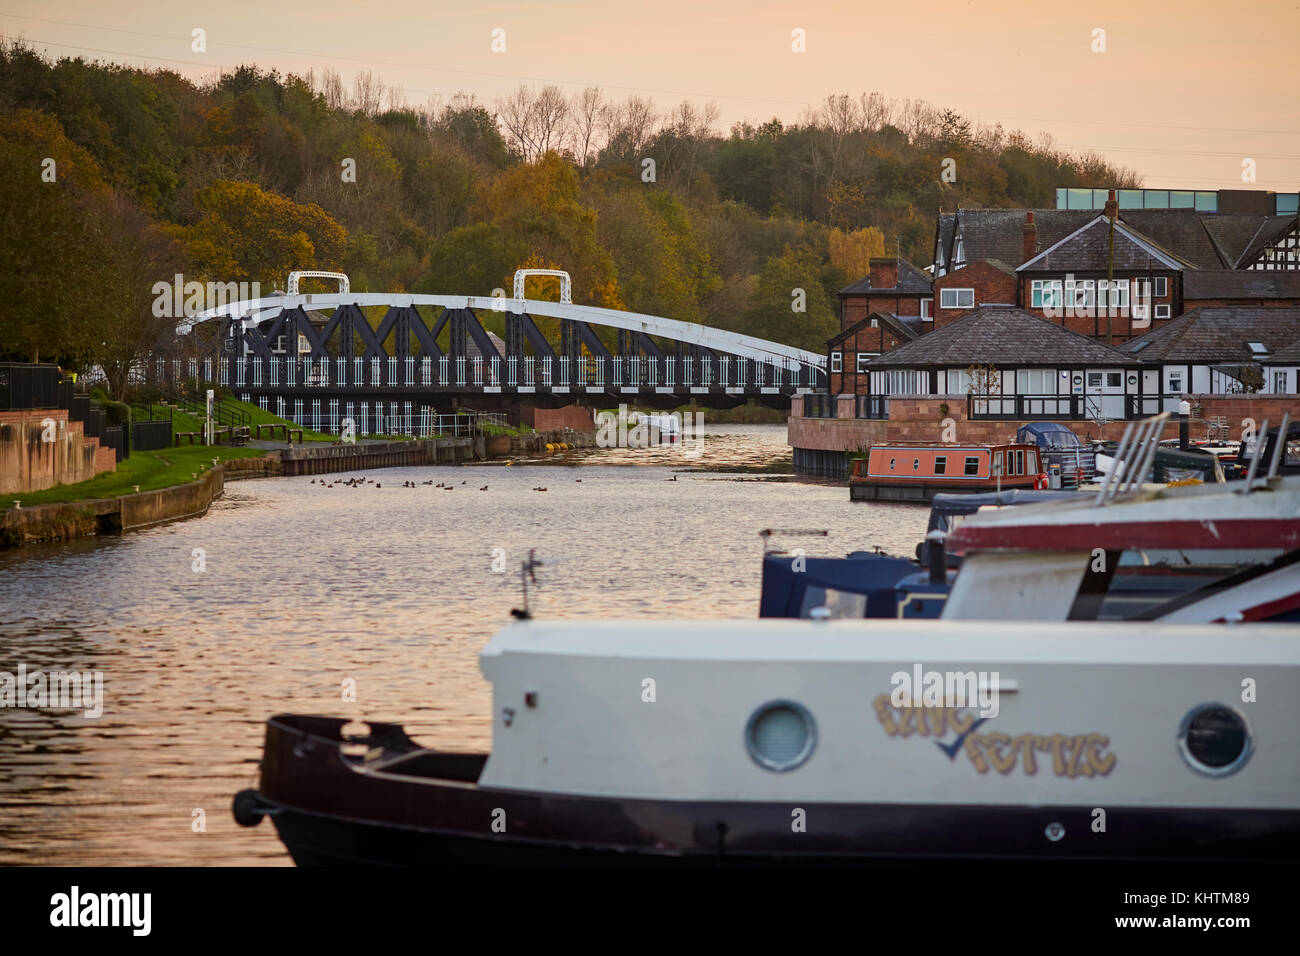 Canal boats floating on the River Weaver with golden autumn trees in the landscape and the Northwhich Town Swing Bridge in the background, Northwich i Stock Photo